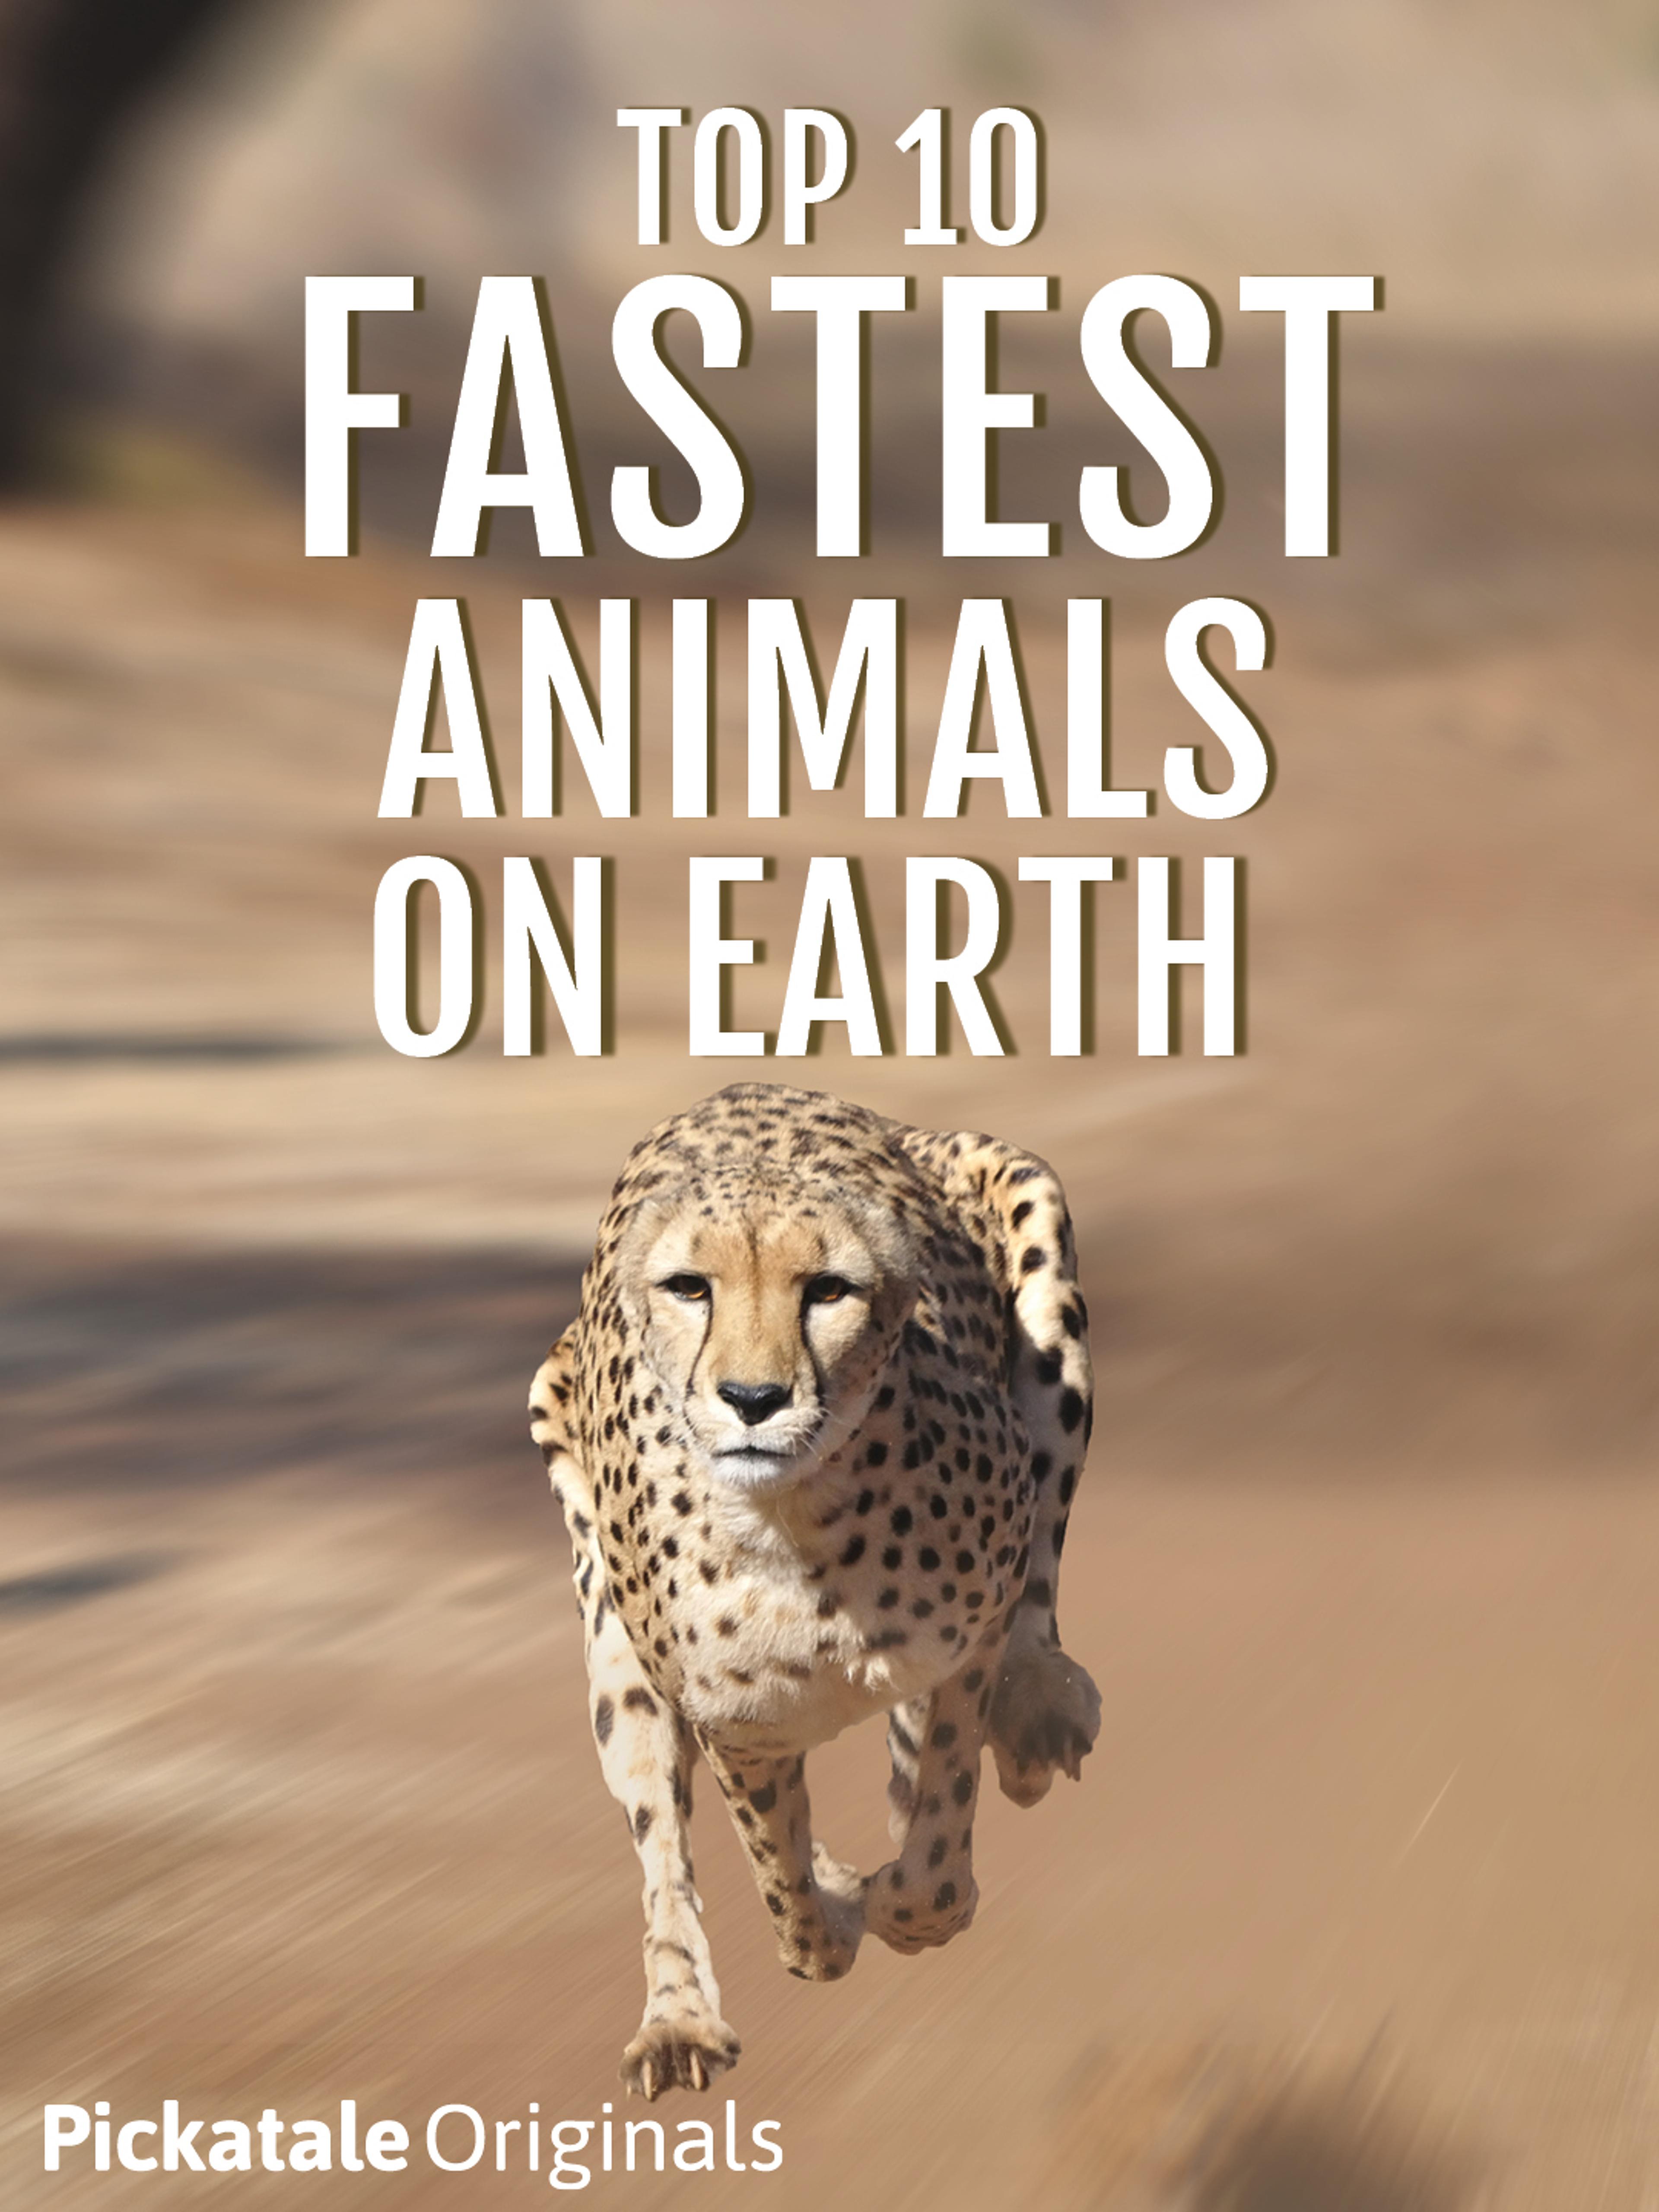 Top 10 Fastest Animals on Earth